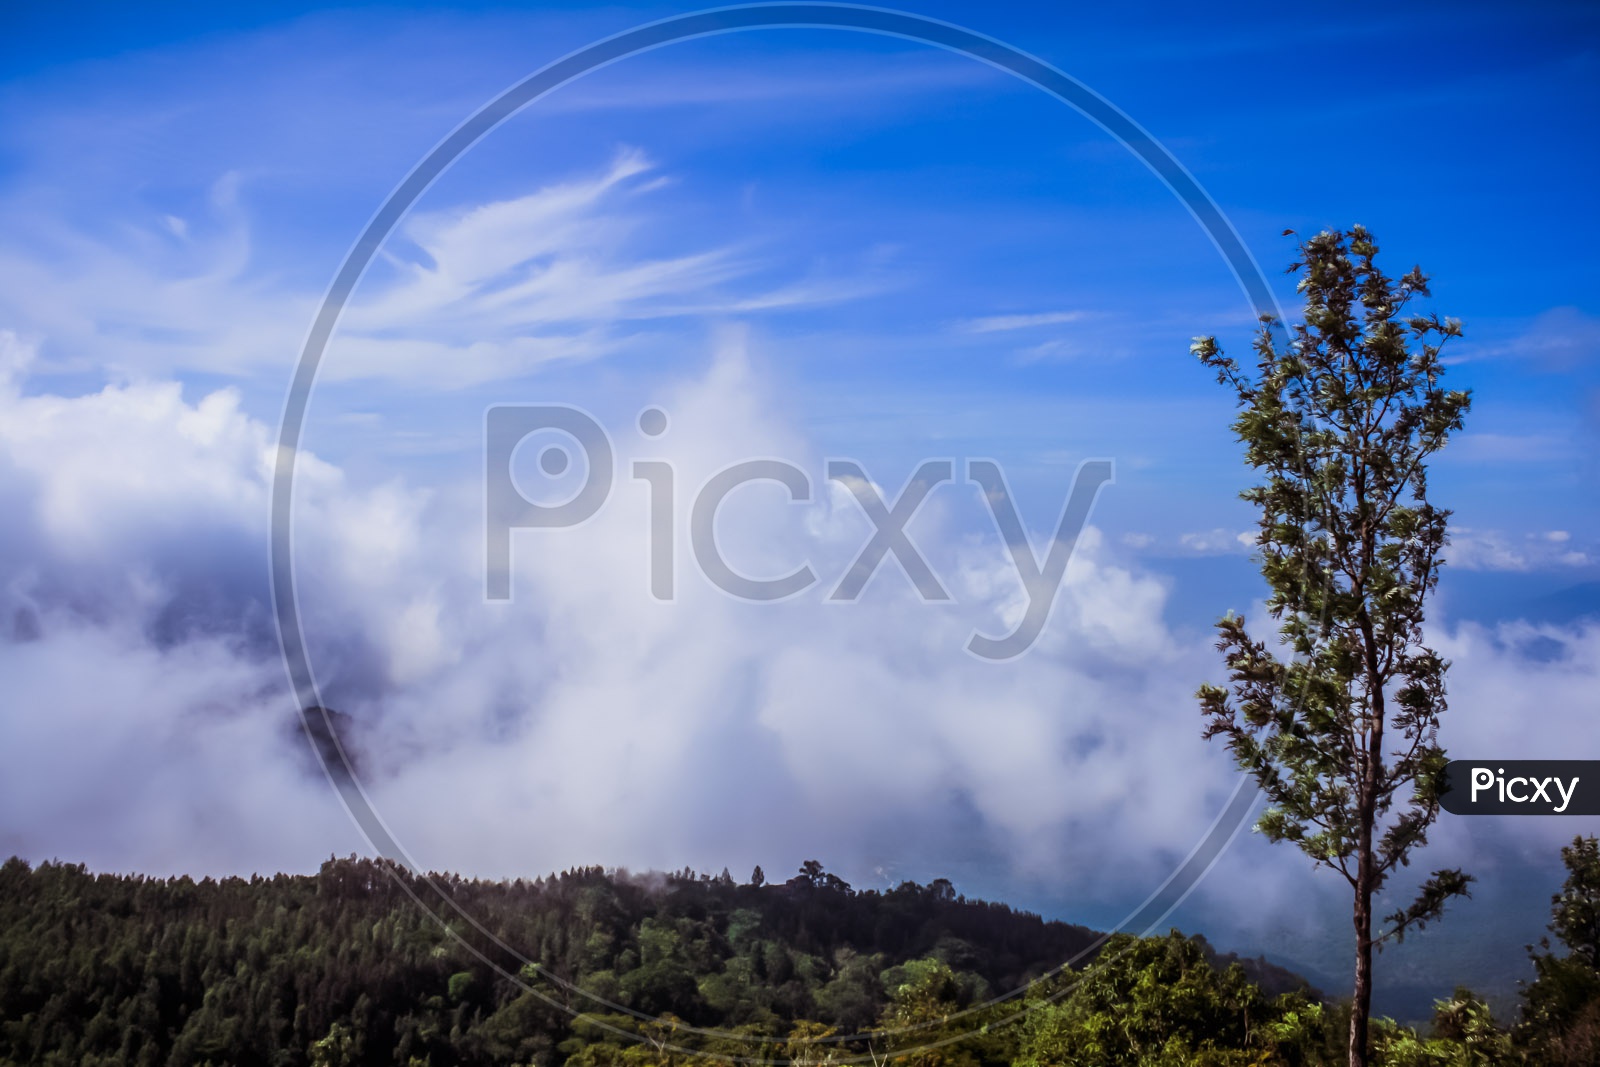 Landscape of Floating clouds on trees